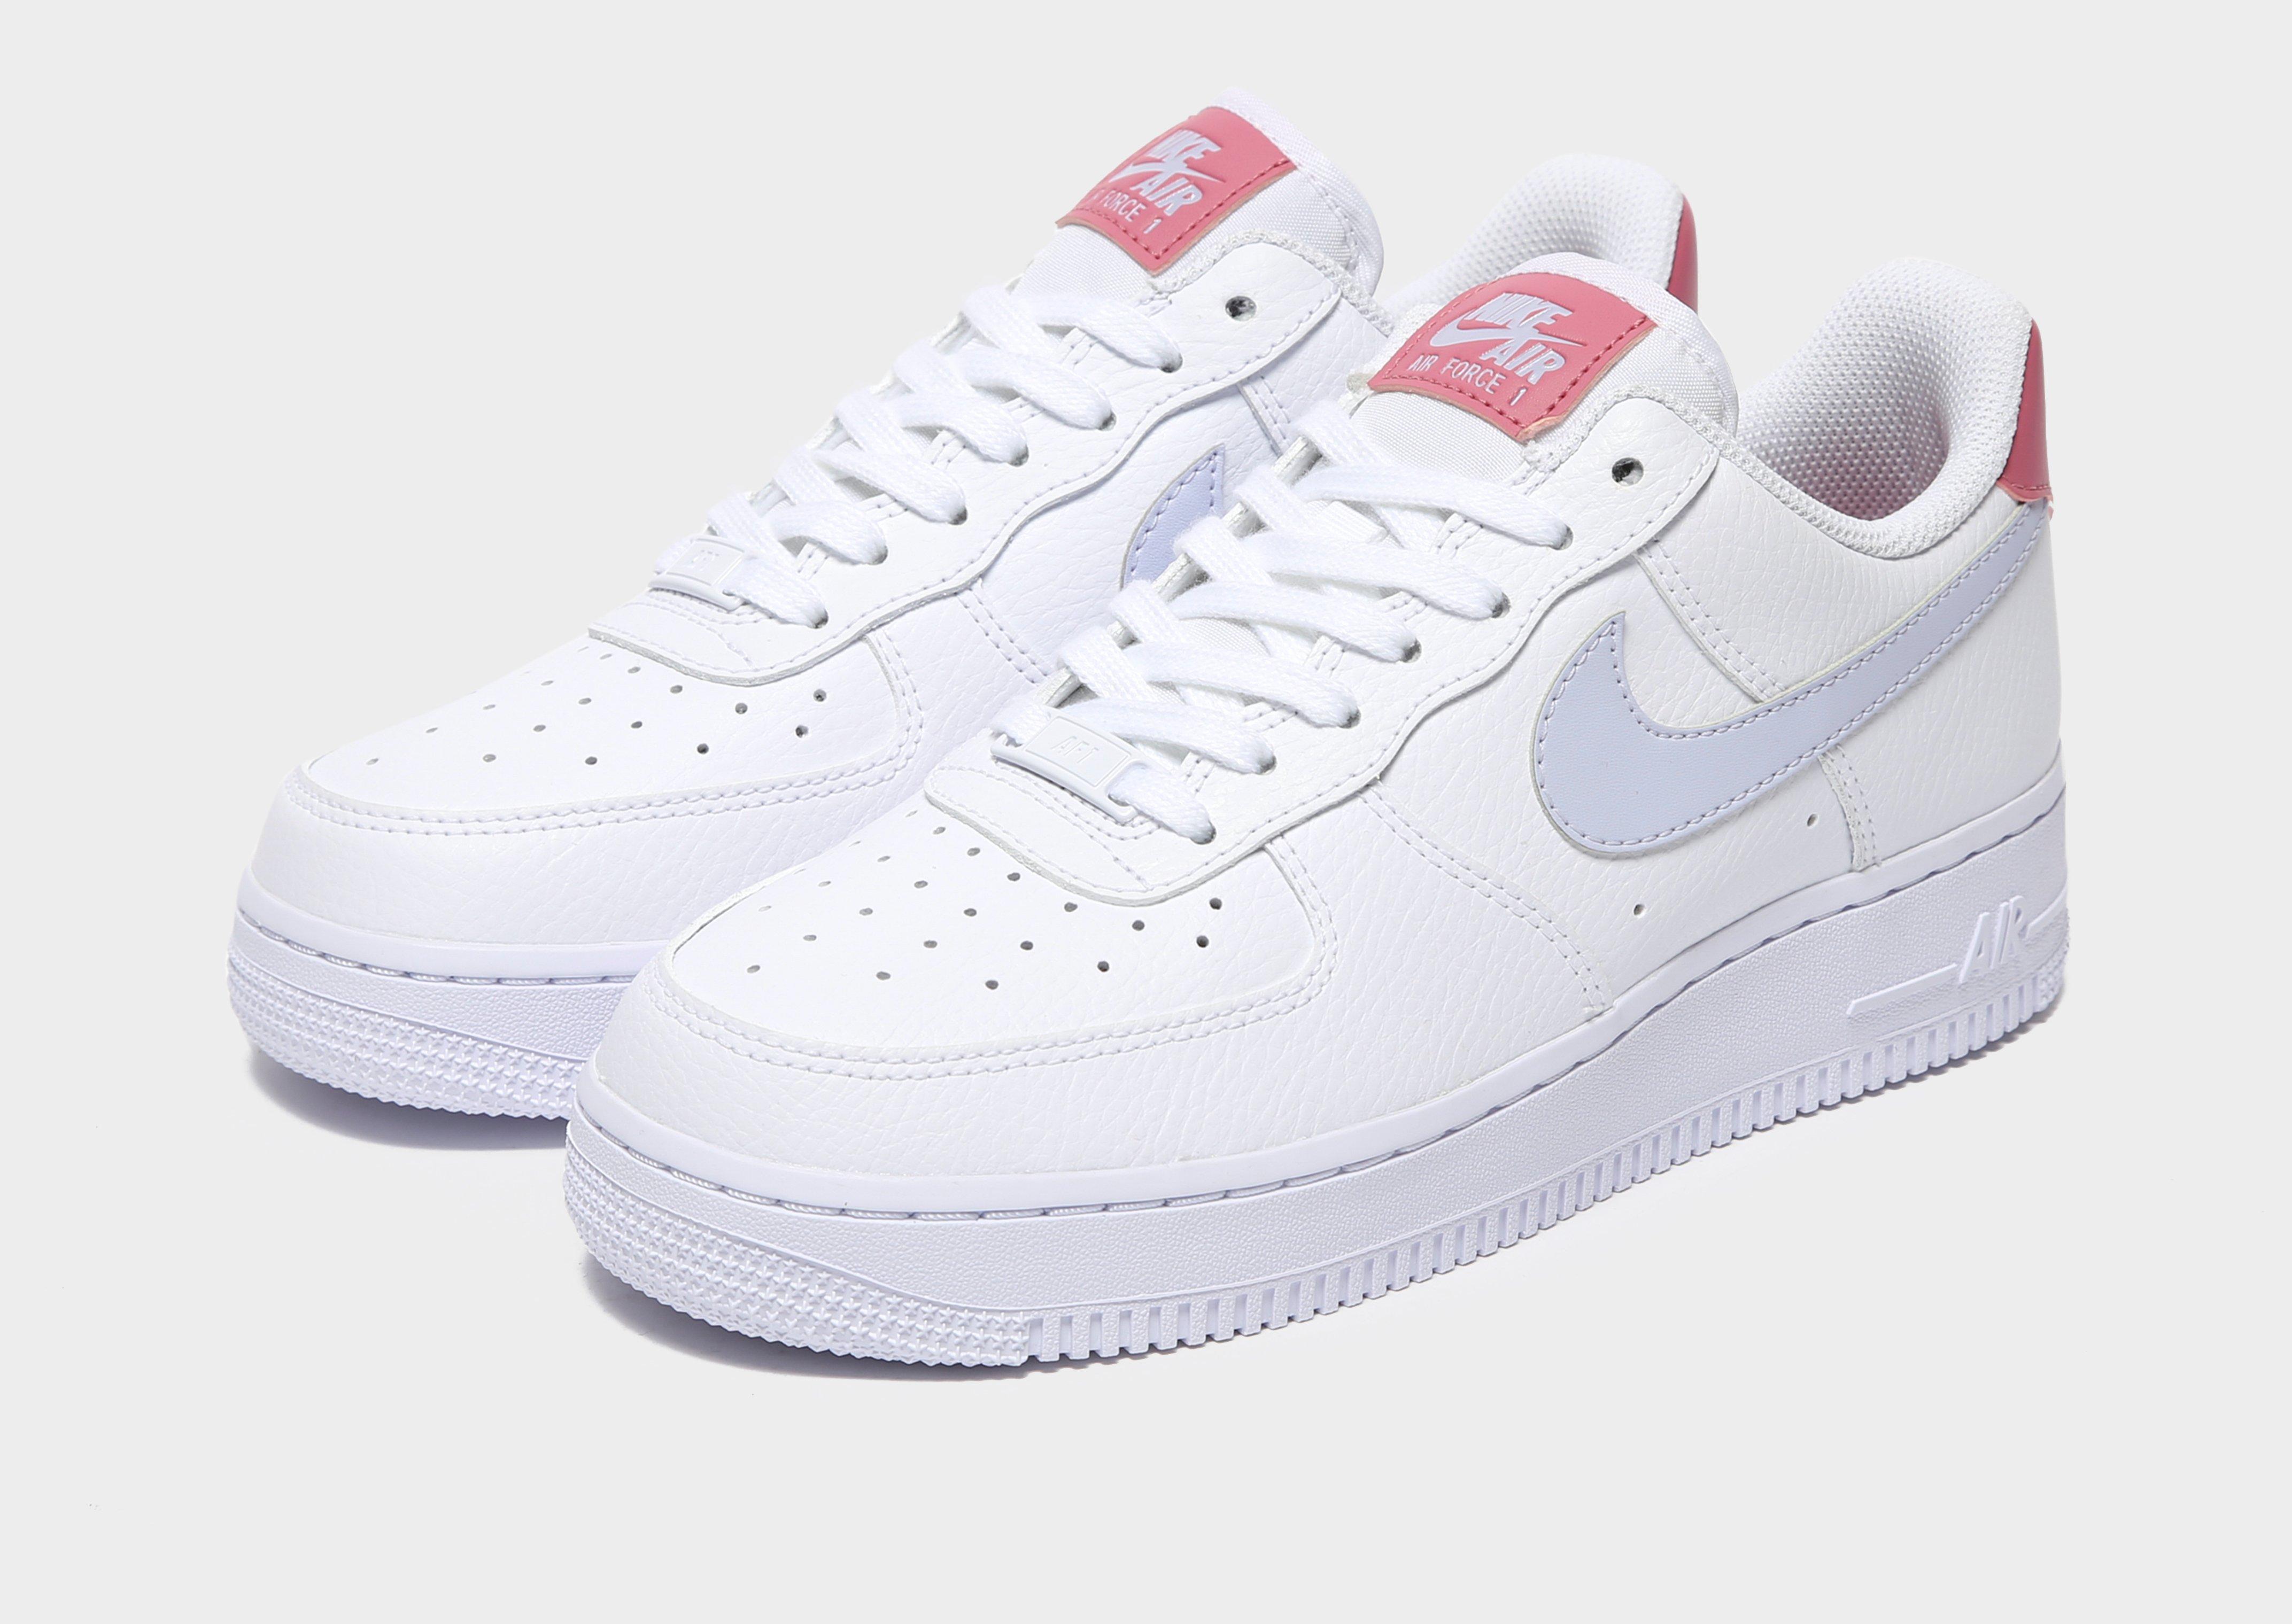 Acquista Nike Air Force 1 '07 Donna in Bianco